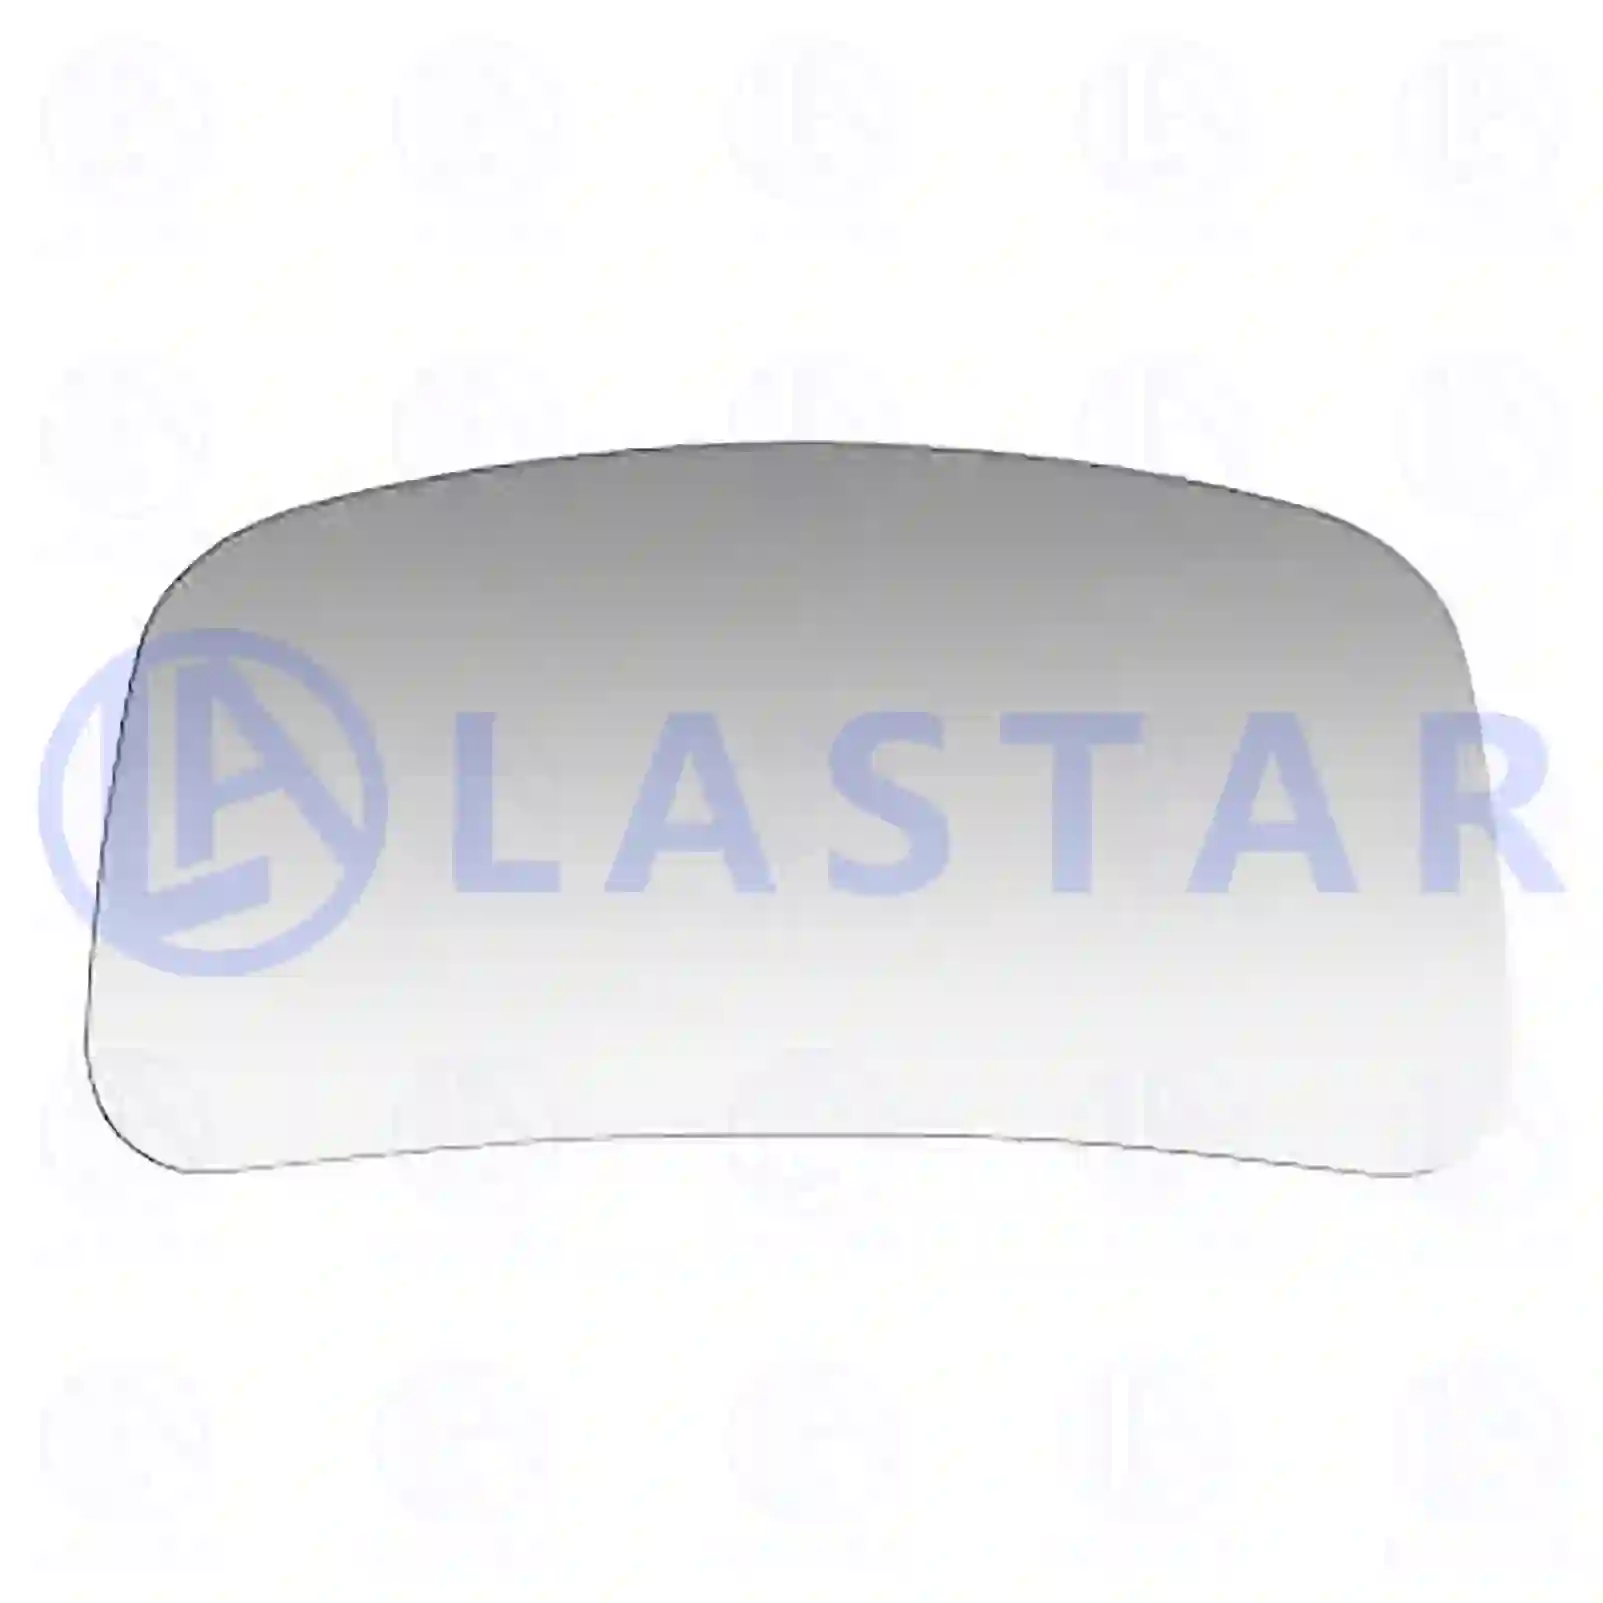 Mirror glass, kerb observation mirror, 77721242, 21203313S1, ||  77721242 Lastar Spare Part | Truck Spare Parts, Auotomotive Spare Parts Mirror glass, kerb observation mirror, 77721242, 21203313S1, ||  77721242 Lastar Spare Part | Truck Spare Parts, Auotomotive Spare Parts